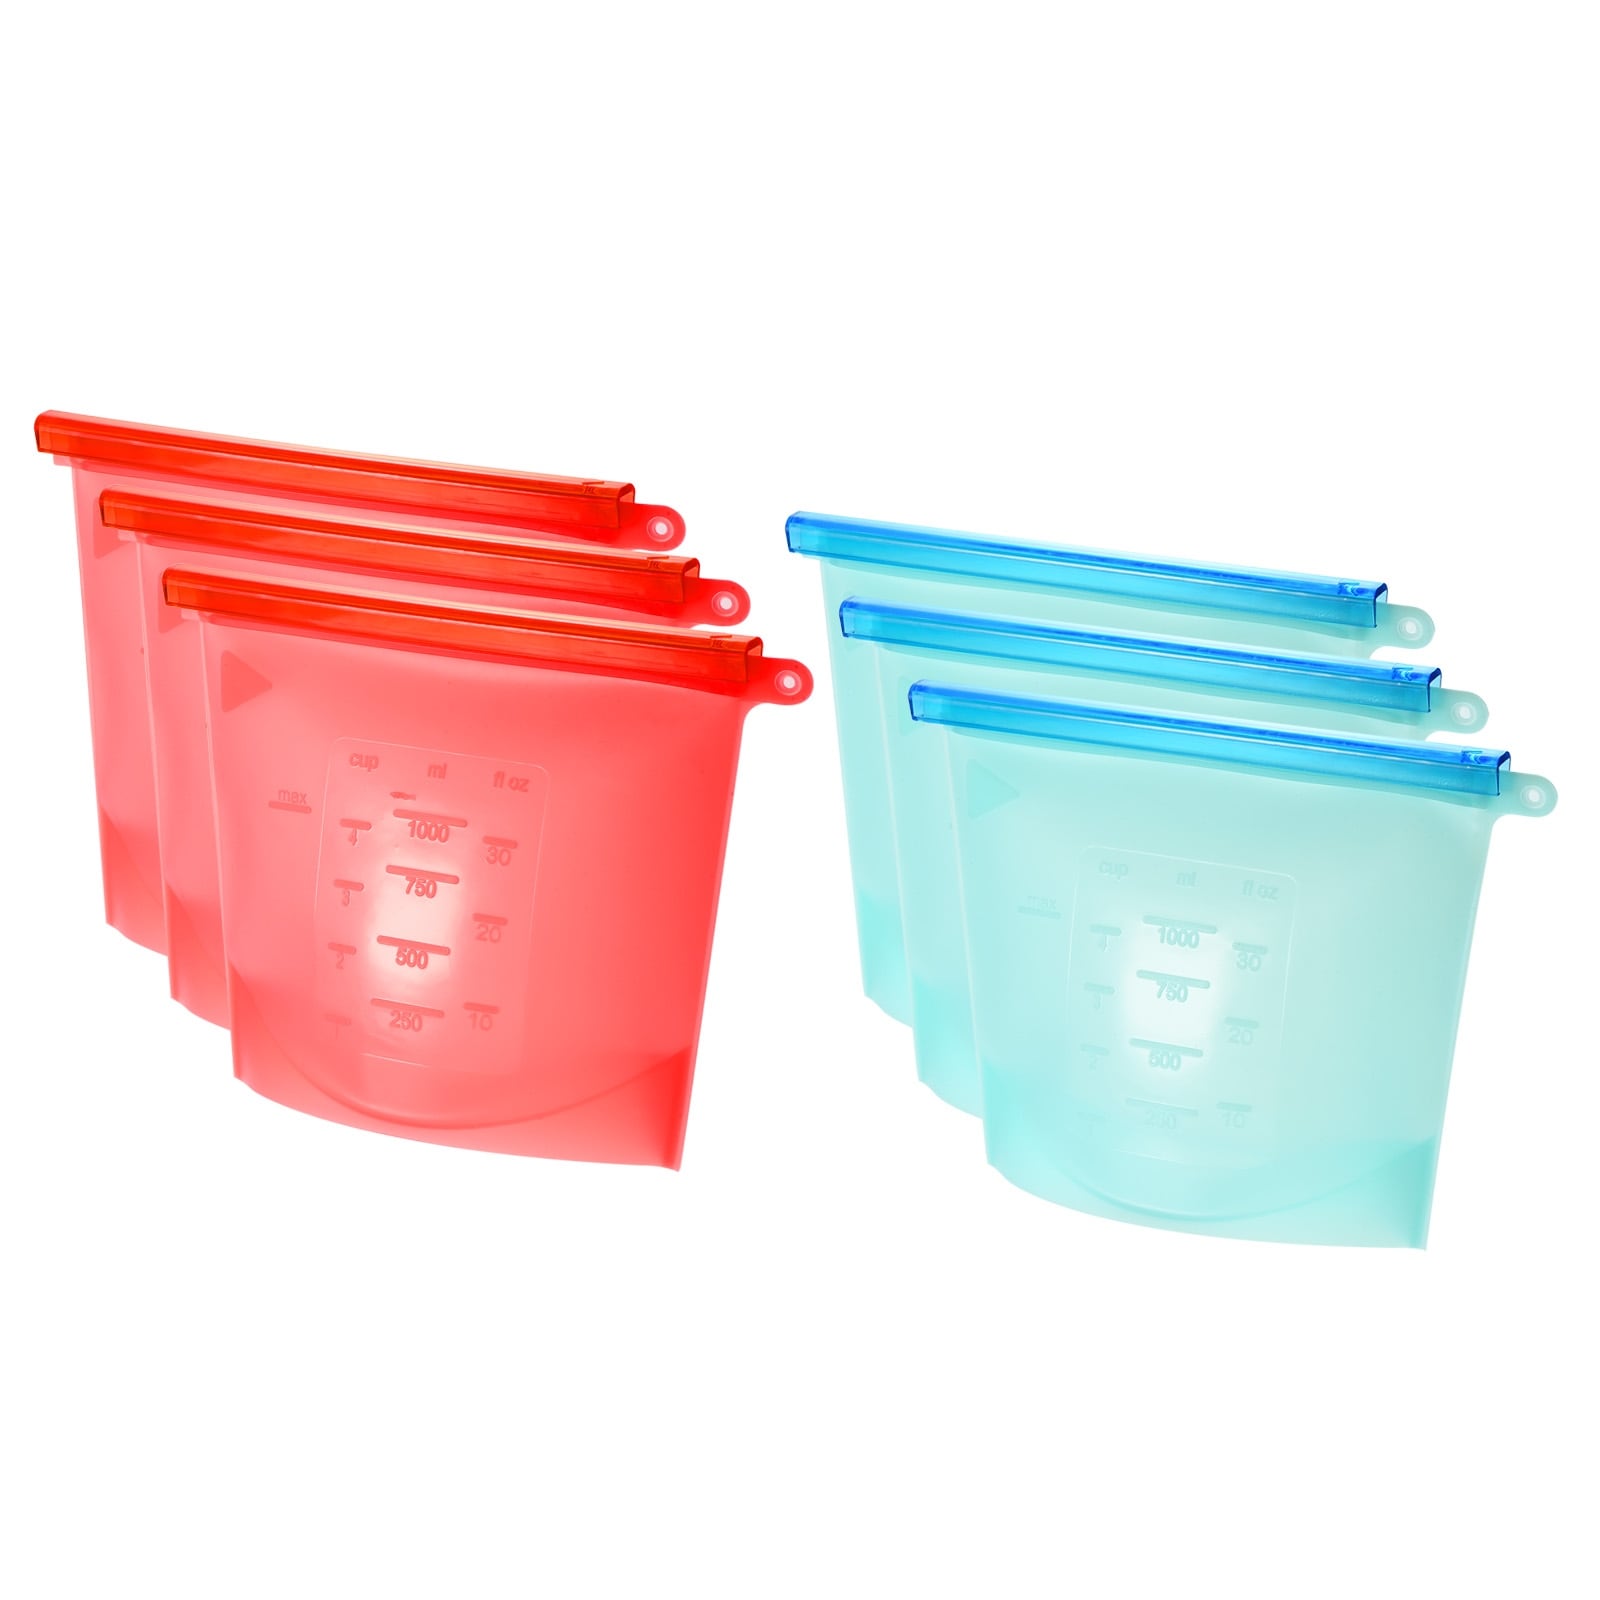 https://ak1.ostkcdn.com/images/products/is/images/direct/e04ee1e7c589139dc40d36b73dbe8d687ac9fd3a/Reusable-Refrigerator-Food-Storage-Bag-Silicone-Fresh-Bags-Blue%2BRed-6Pcs.jpg